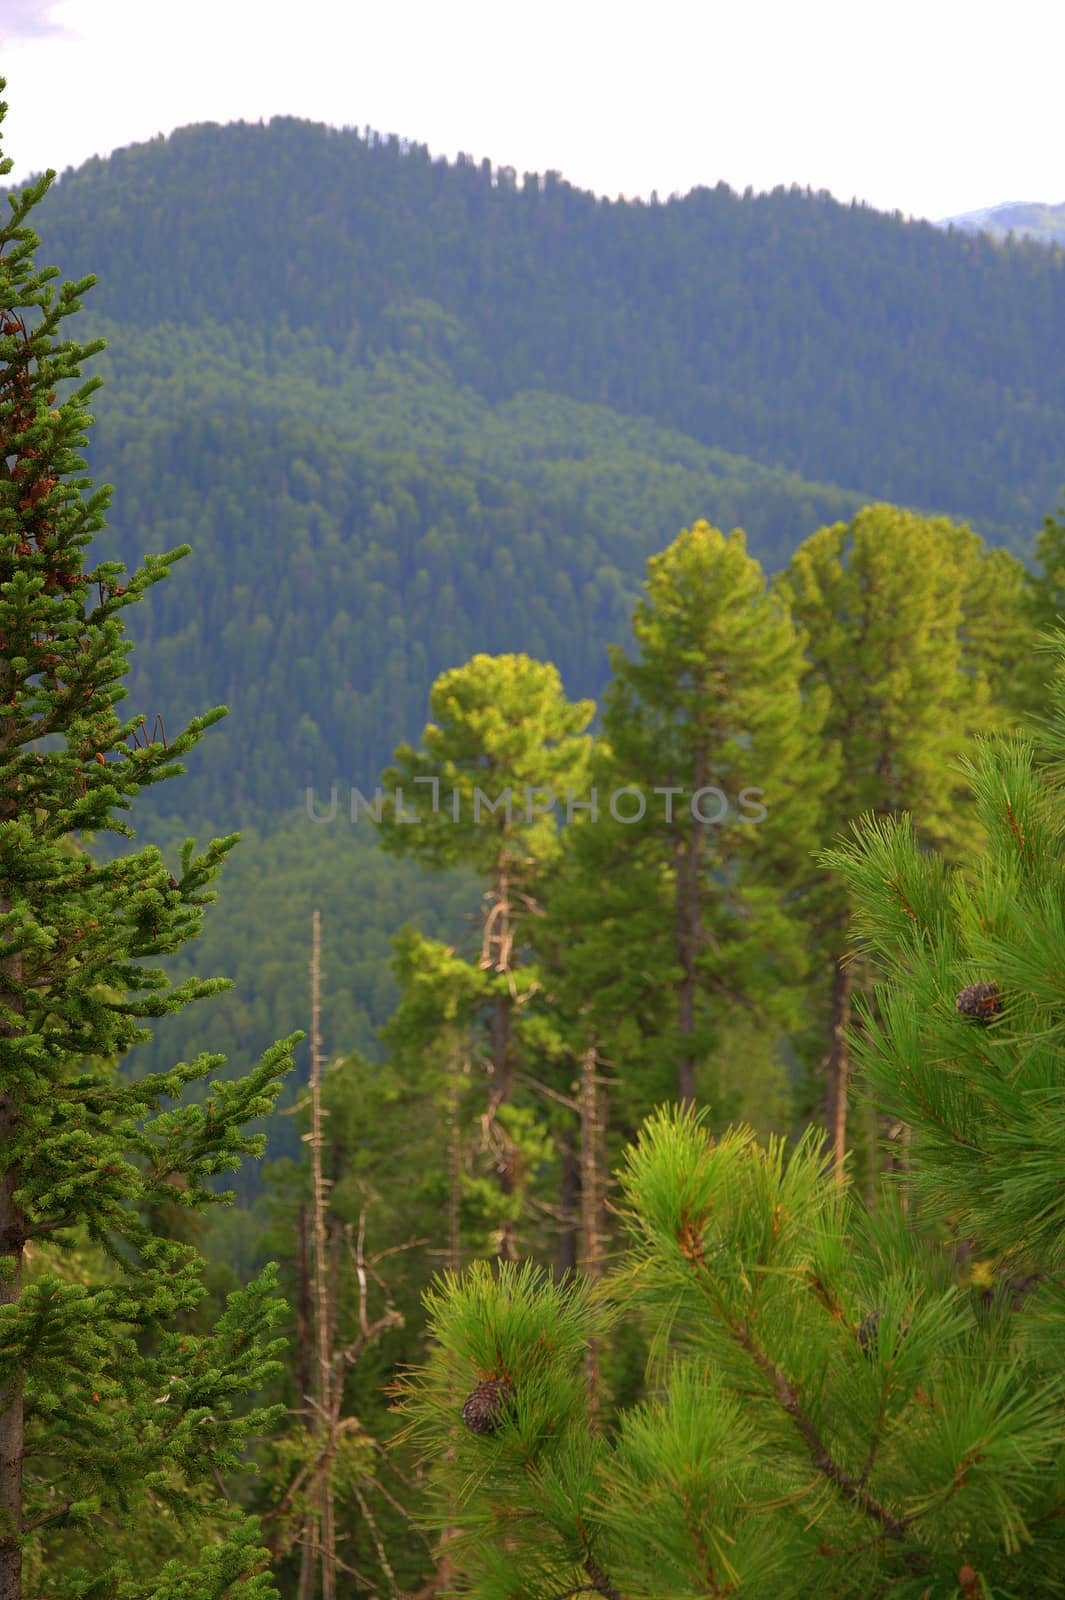 A look at the forested hills through the branches of conifers. Altai, Siberia, Russia.